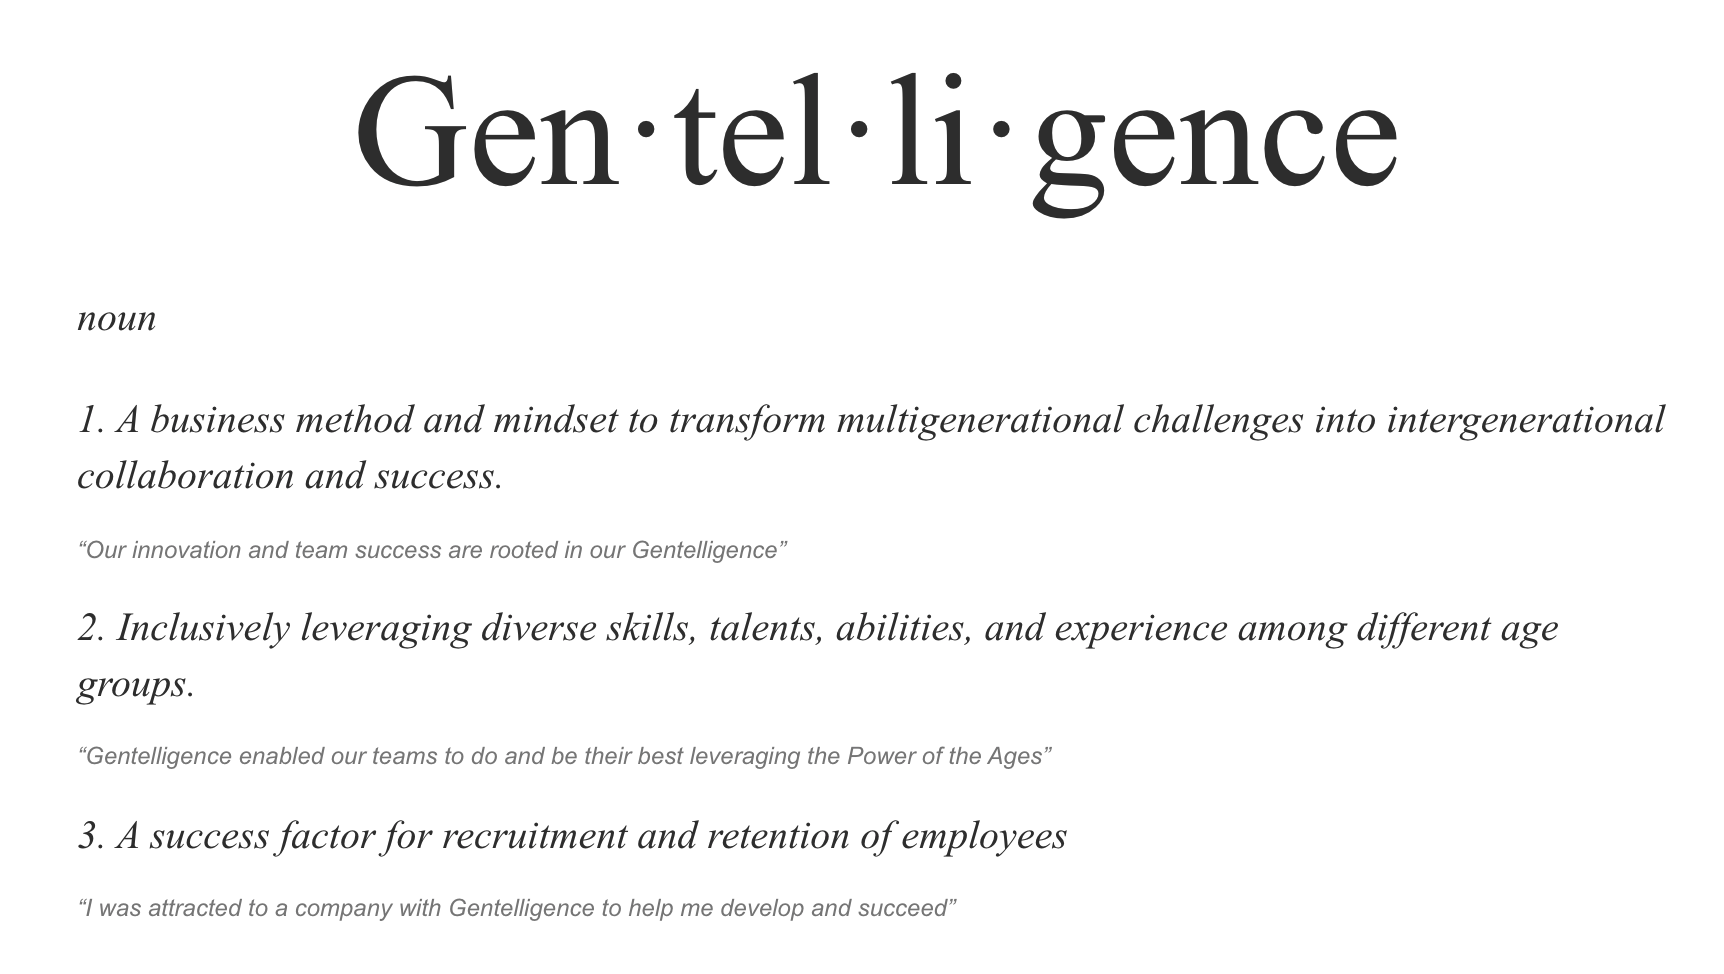 Definition of gentelligence (n): A business method and mindset to transform multigenerational challenges into intergenerational collaboration and success.